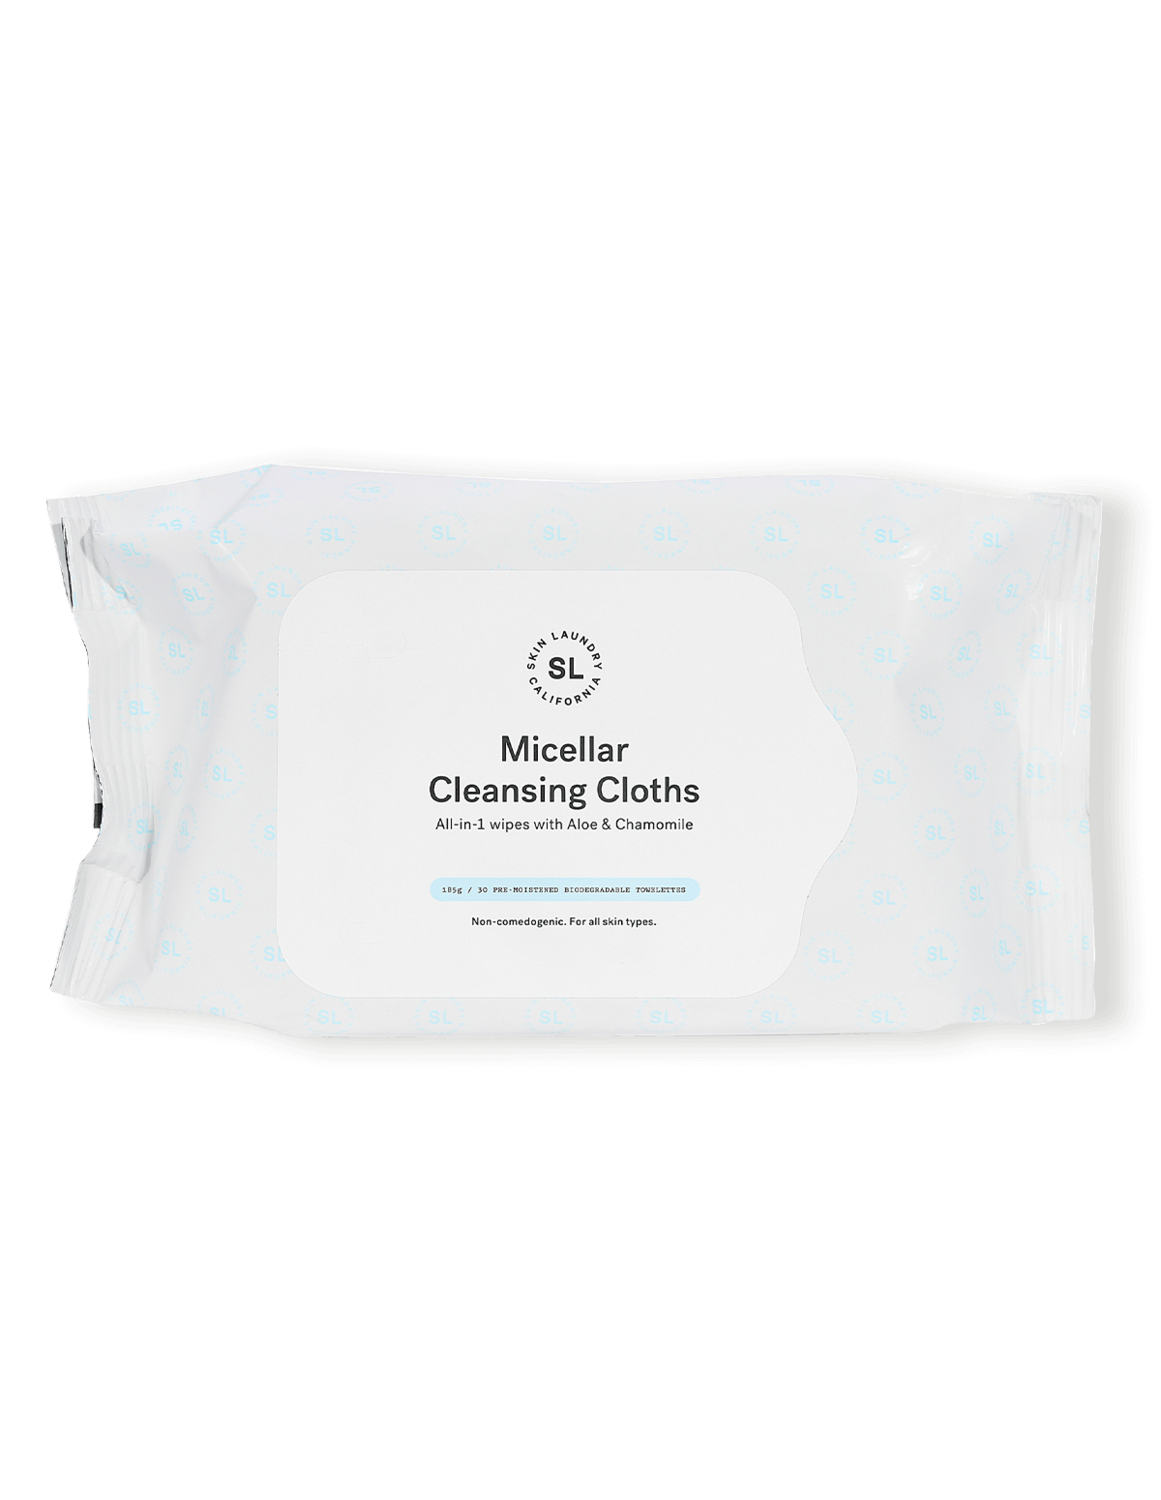 Micellar Cleansing Cloths Featured Image